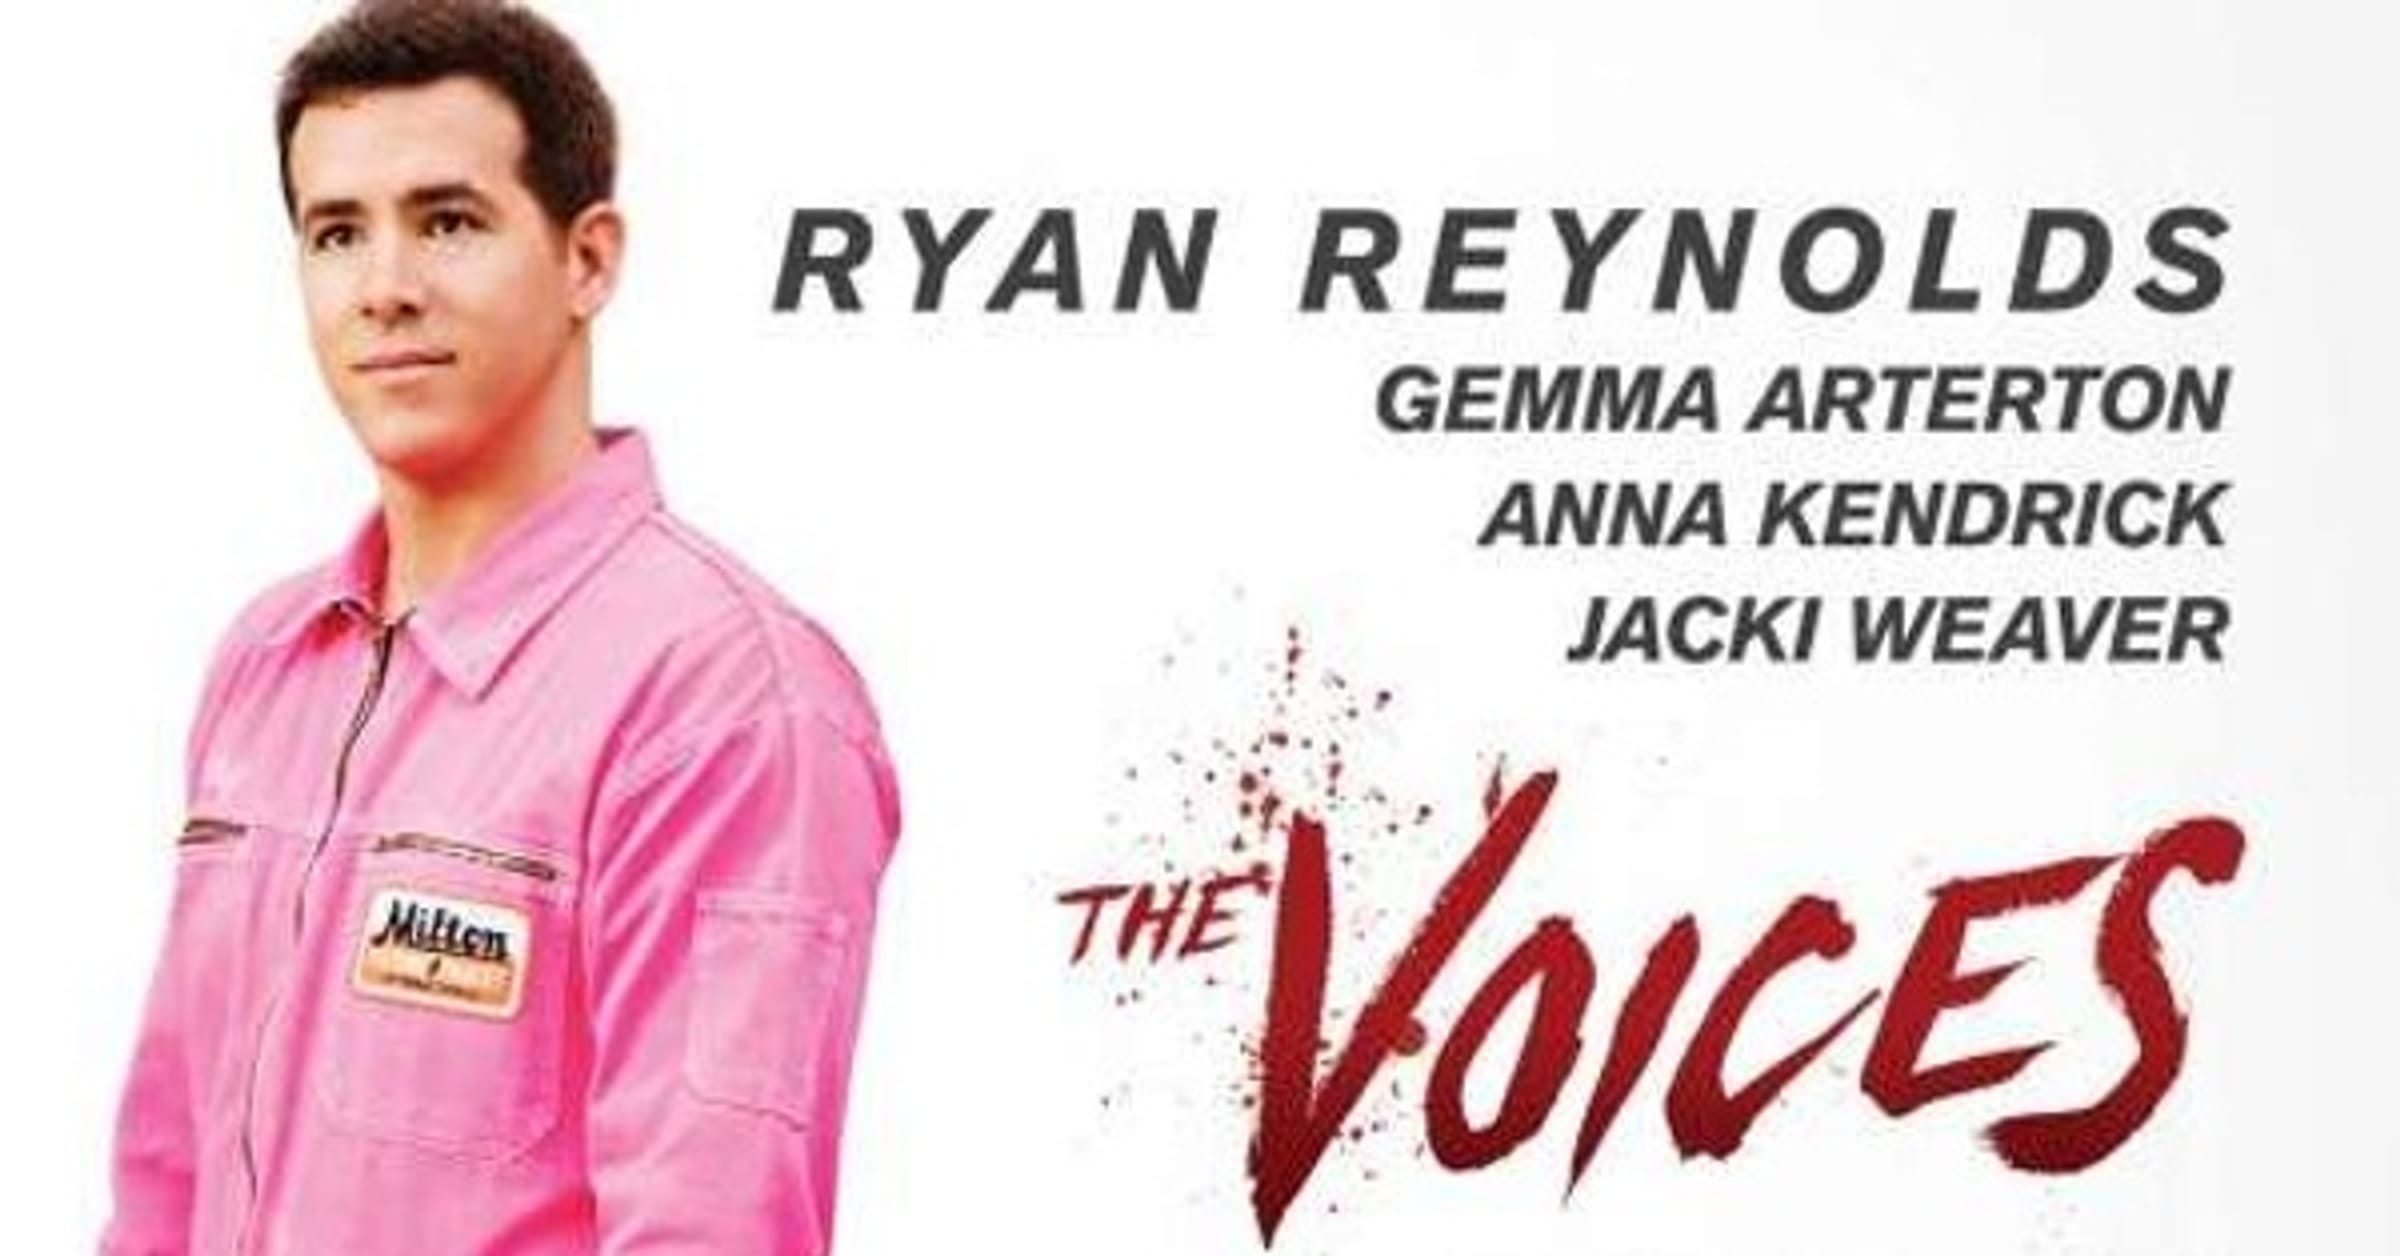 New Images Of Ryan Reynolds In The Voices, Movies